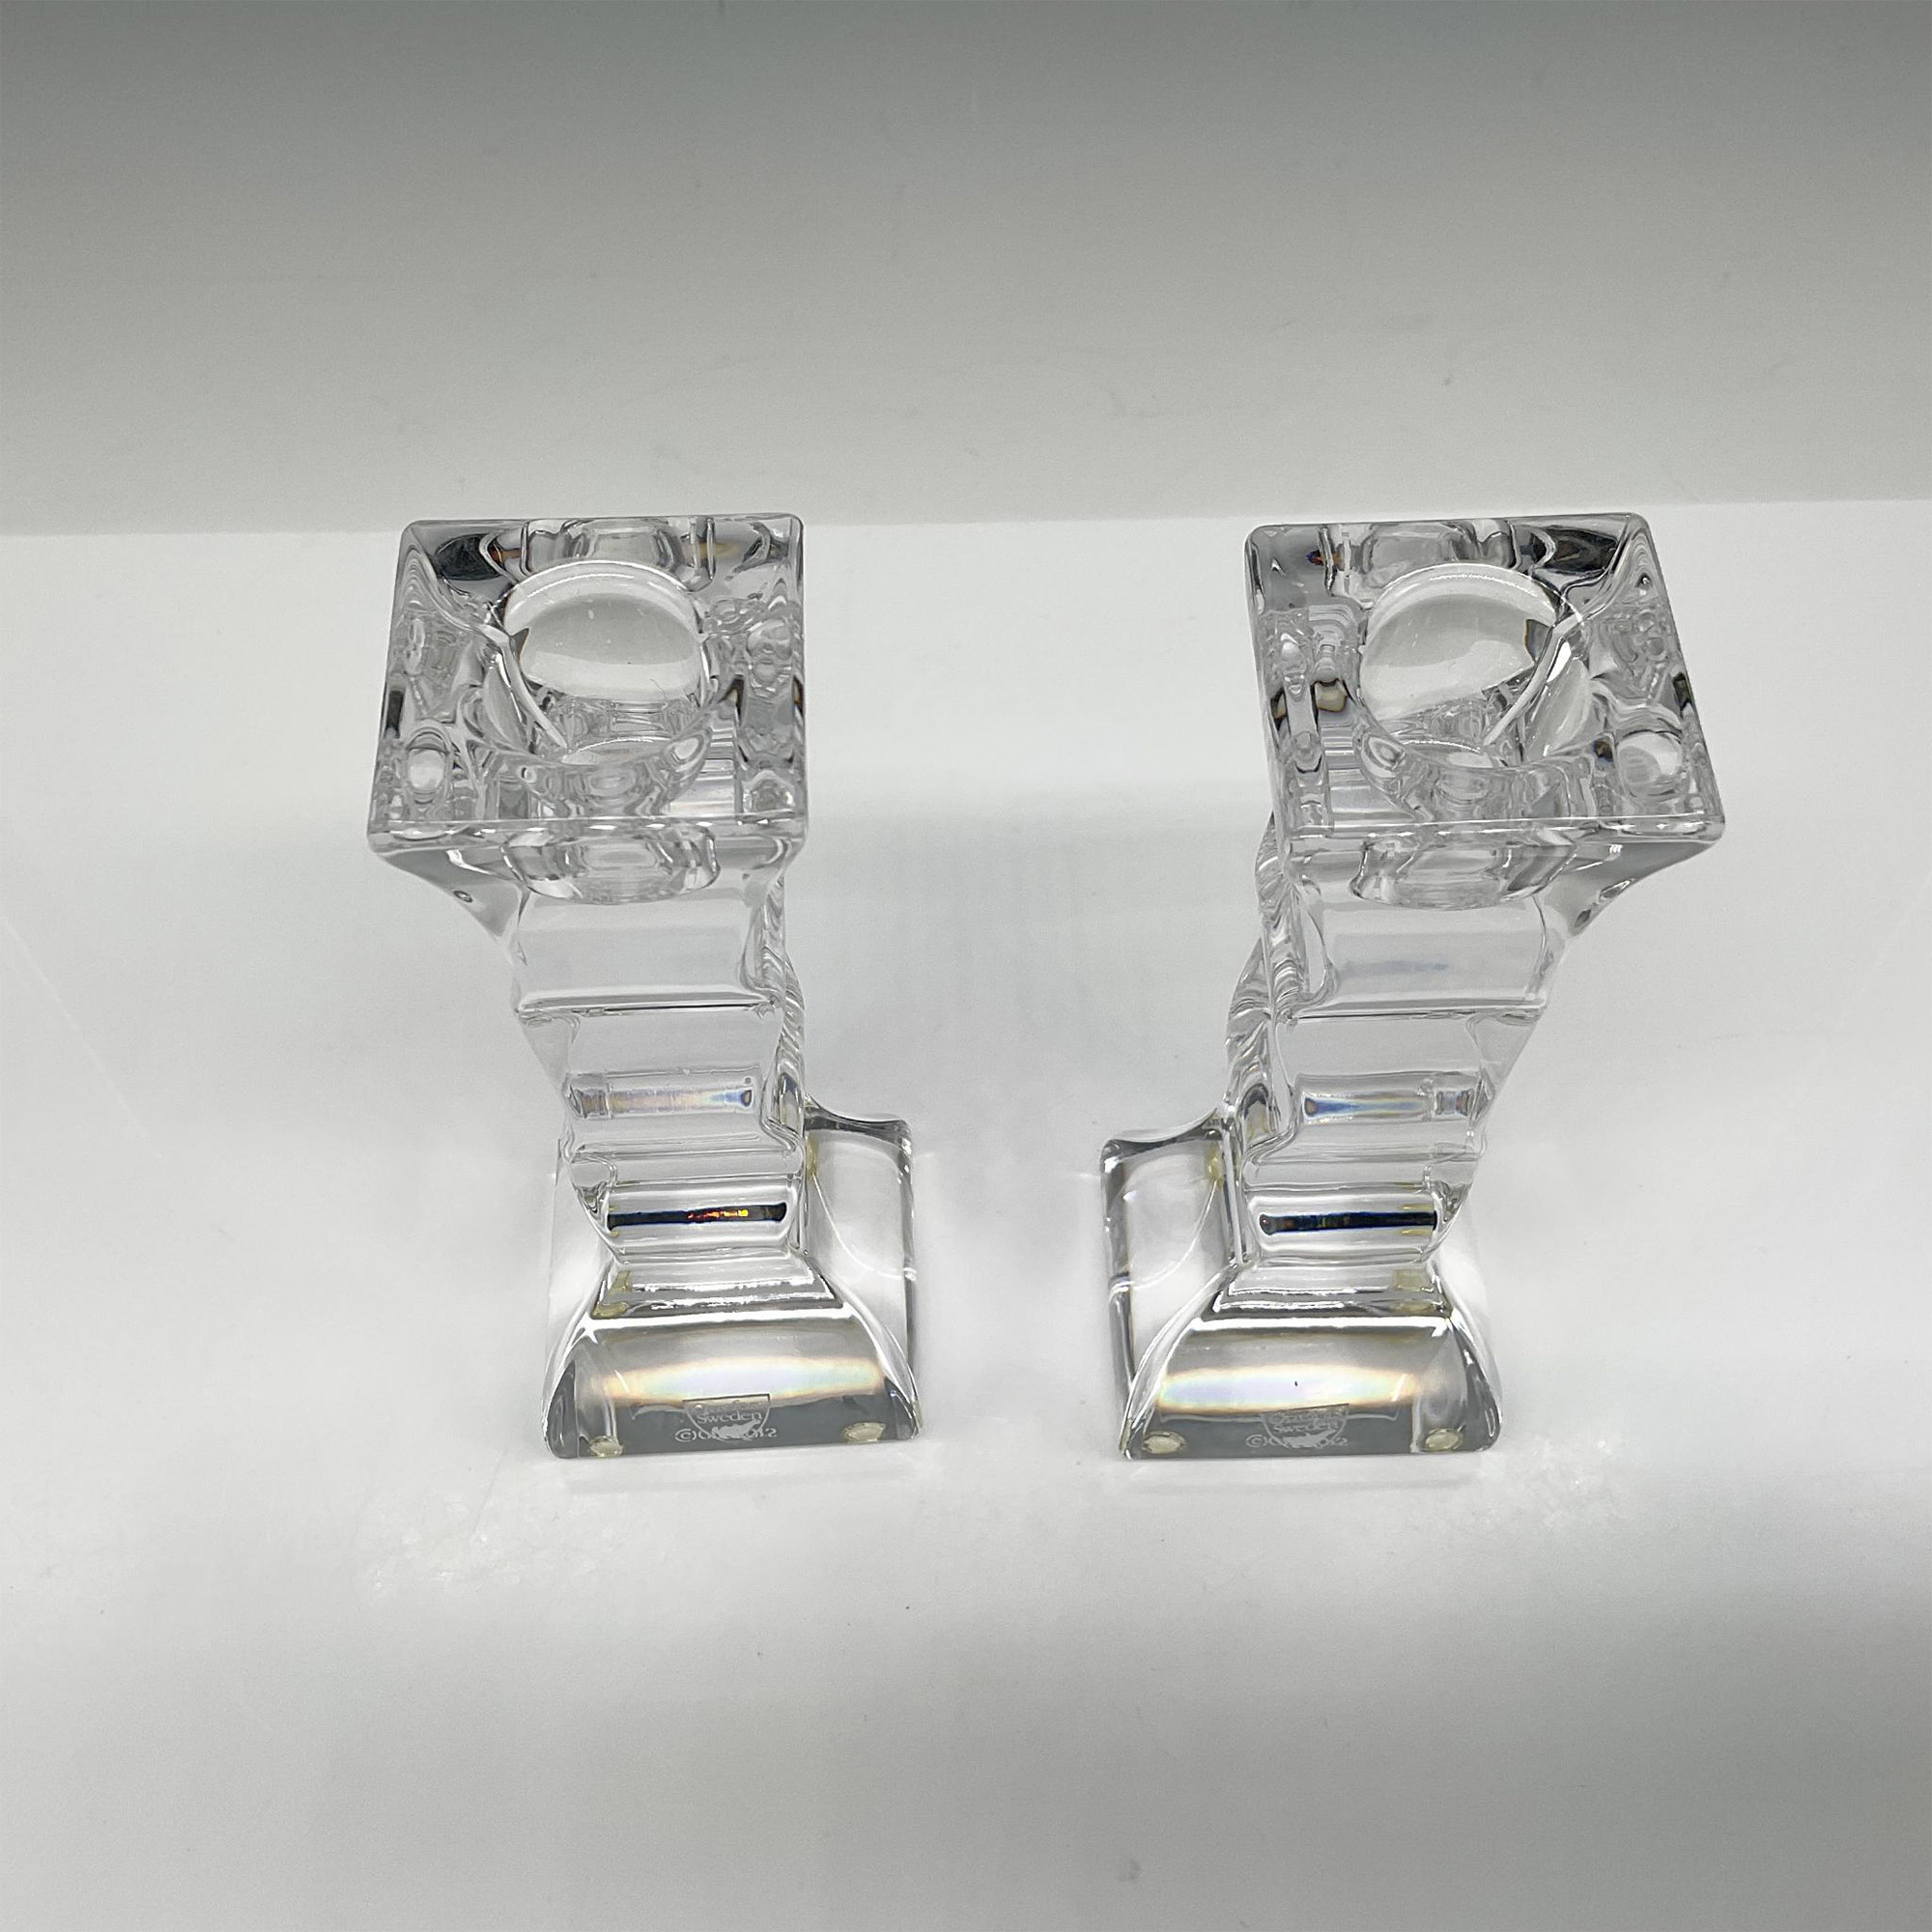 Pair of Orrefors Crystal Candle Stick Holders - Image 2 of 3